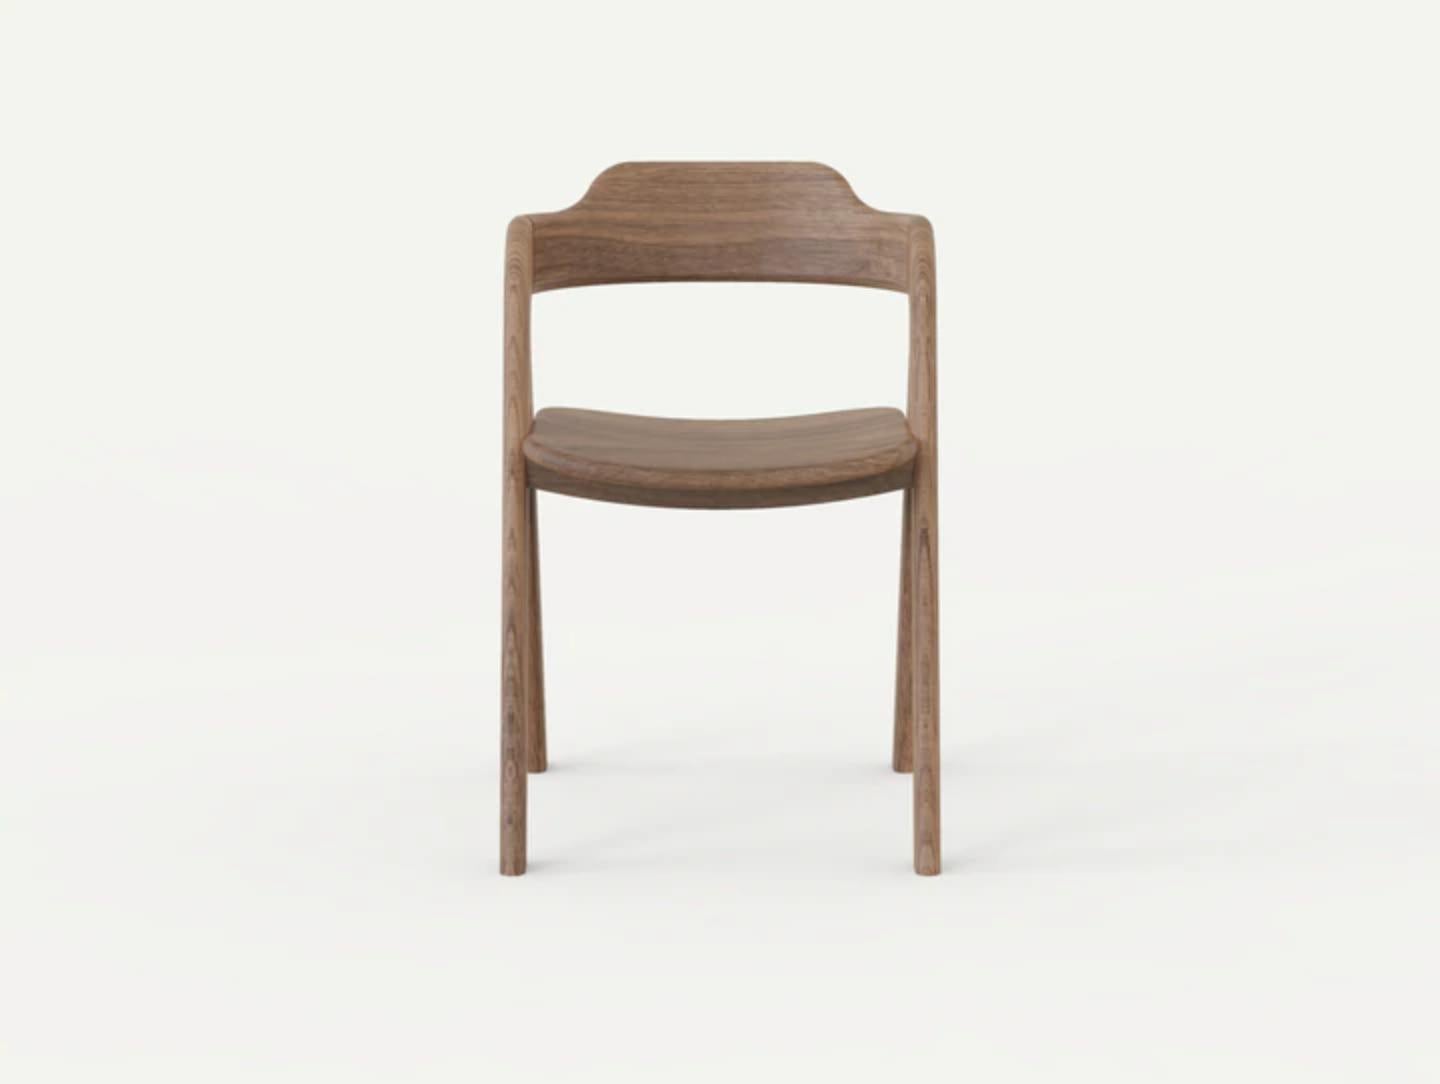 Balance Chair by Sebastián Angeles
Material: Walnut
Dimensions: W 40 x D 40 x 100 cm
Also Available: Other colors available,

The love of processes, the properties of materials, details and concepts make Dorica Taller a study not only of